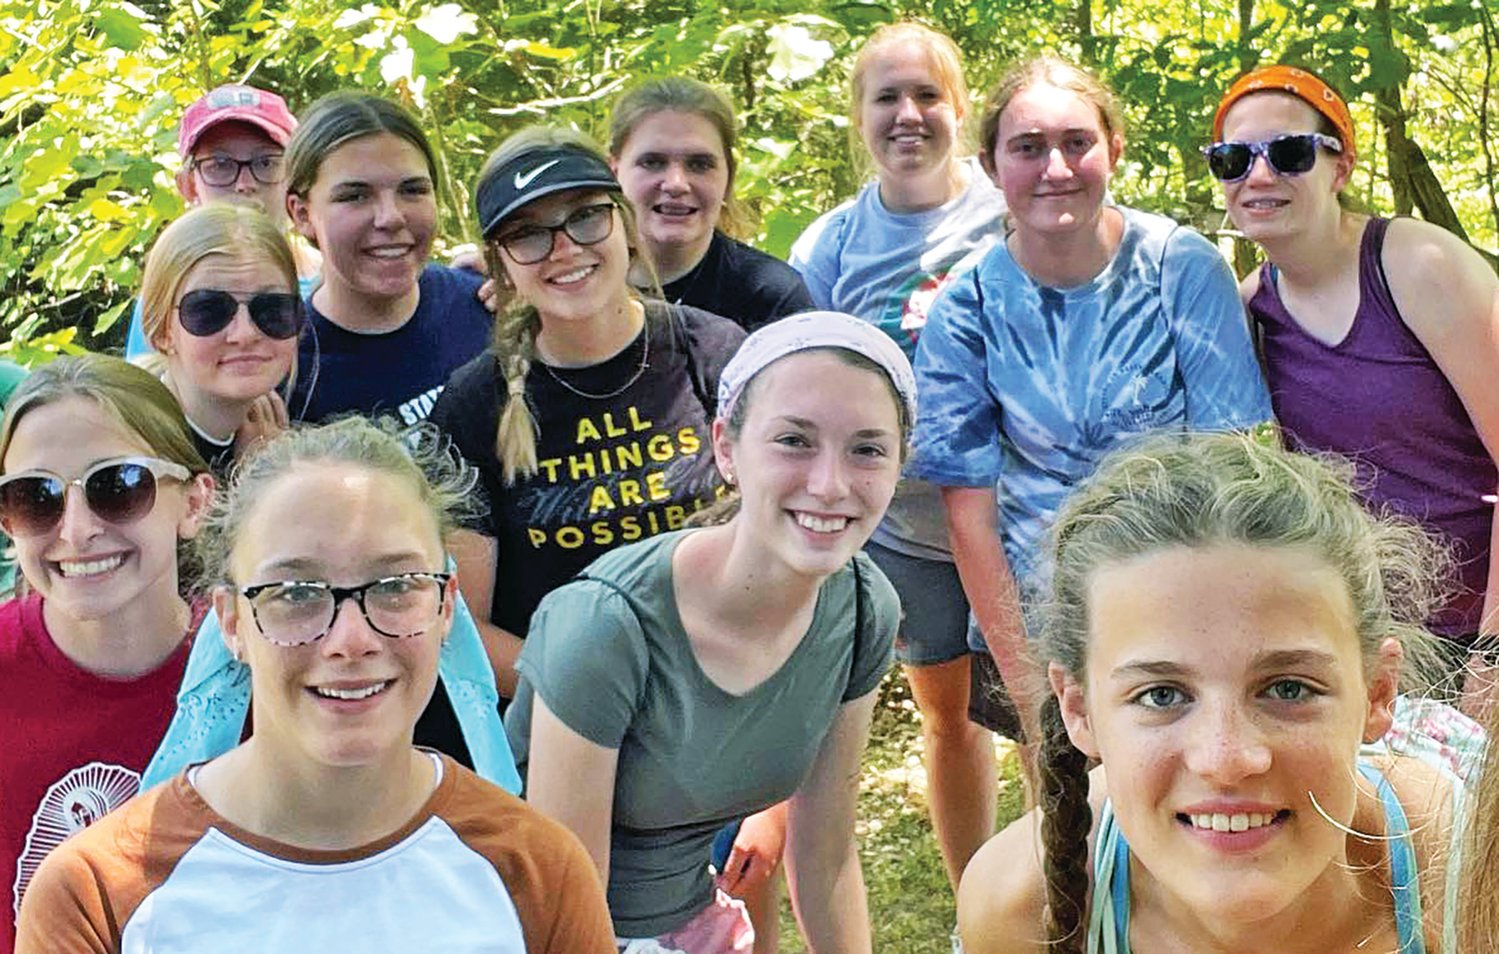 Girls at this year’s Camp Siena Catholic summer camp experience for high school girls pause for a “selfie” during a packed day of activities. One hundred sixty middle school and high school teens took part in Catholic camps sponsored by the Jefferson City diocese this summer.